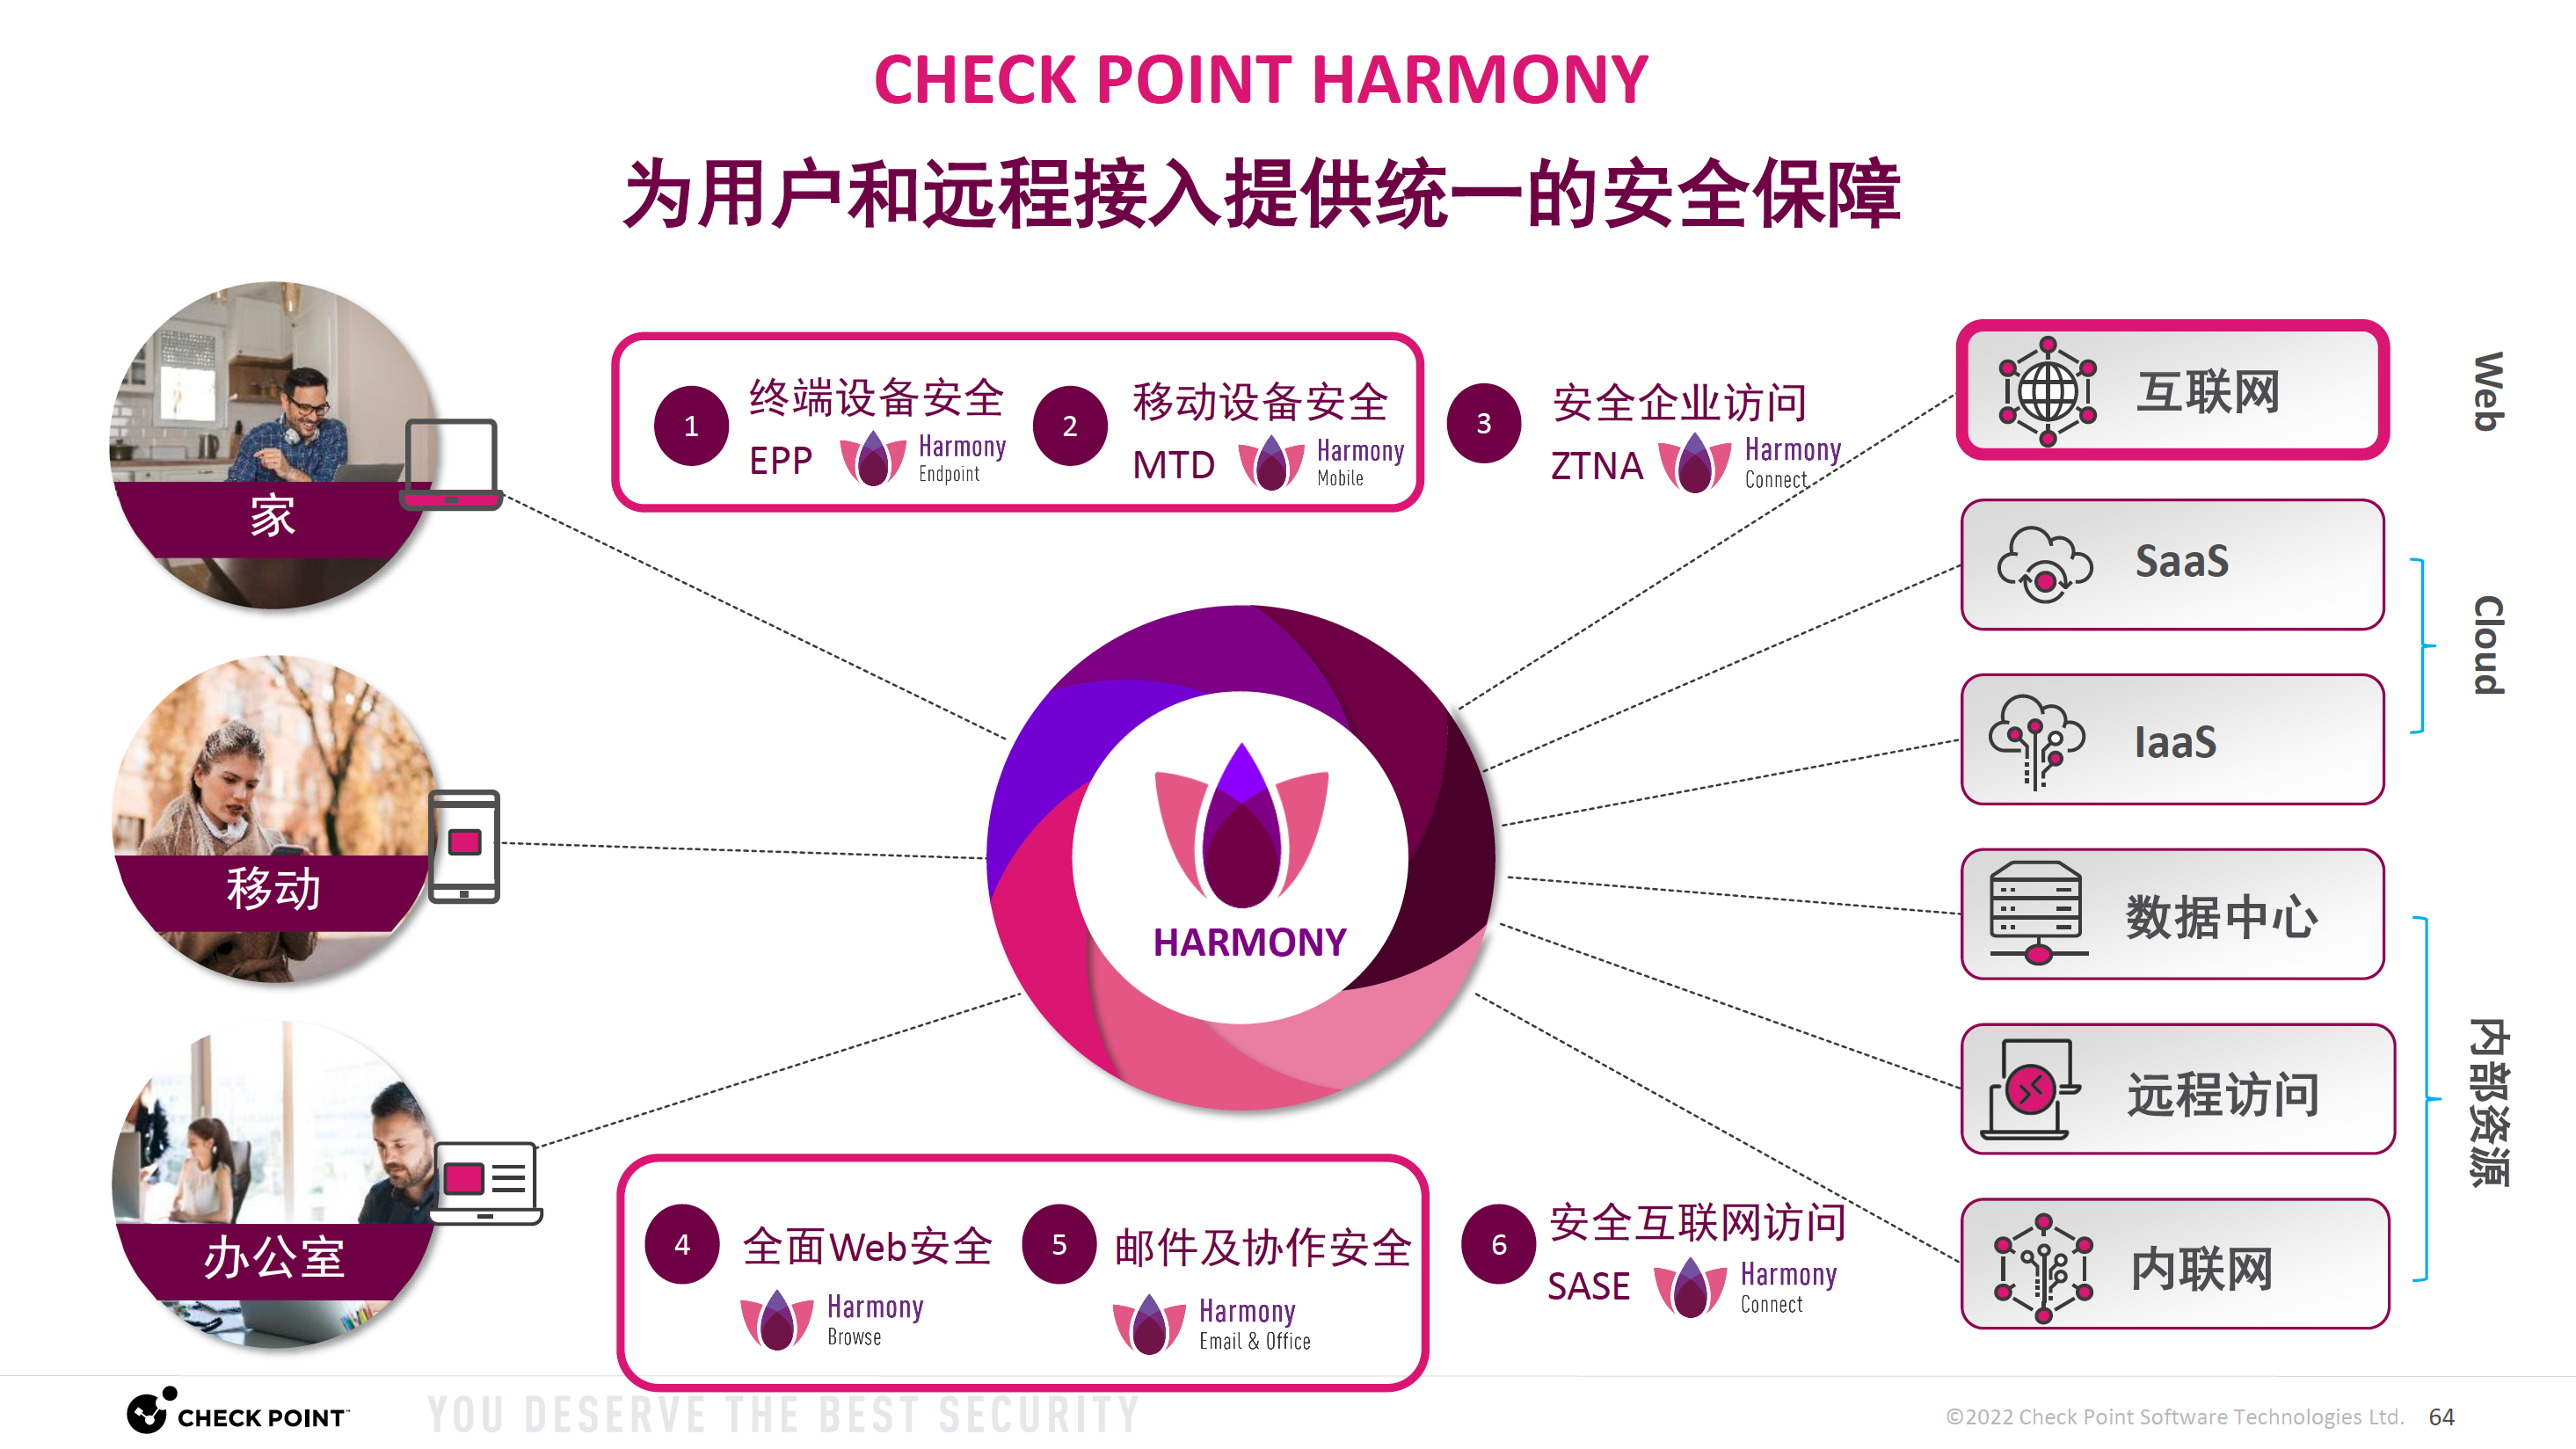 CheckPoint Harmony Endpoint Basic、CheckPoint Harmony Endpoint Advanced、CheckPoint Harmony Endpoint Complete、CheckPoint Endpoint、CheckPoint CPEP-SBA-THRET1M-1Y、CheckPoint Harmony Endpoint Advanced、CheckPoint CPEP-SBA-THRET1M-2Y、CheckPoint Harmony Endpoint Complete、CheckPoint CPEP-SBA-THRET1M-3Y、CheckPoint Harmony Mobile and Endpoint bundle、CheckPoint CPEP-SBA-THRET1Q-1Y、CheckPoint Harmony Endpoint Data、CheckPoint CPEP-SBA-THRET1Q-2Y、CheckPoint Endpoint Management、CheckPoint CPEP-SBA-THRET1Q-3Y、CheckPoint Harmony Endpoint Threat Hunting、CheckPoint CPEP-SBA-THRET1Y-1Y、CheckPoint Harmony Email & Collaboration、CheckPoint CP-HAR-BROWSE-1Y、CheckPoint Endpoint、CheckPoint CP-HAR-BROWSE-2Y、CheckPoint Email、CheckPoint CP-HAR-BROWSE-3Y、CheckPoint Email & Collaboration、CheckPoint CP-HAR-BROWSE-4Y、CheckPoint Mobile、CheckPoint CP-HAR-BROWSE-5Y、CheckPoint Mobile and Endpoint、CheckPoint CP-HAR-ENDPOINT-1Y、CheckPoint Harmony Endpoint Basic、CheckPoint CP-HAR-ENDPOINT-2Y、CheckPoint Harmony Endpoint Advanced、CheckPoint CP-HAR-ENDPOINT-3Y、CheckPoint Harmony Endpoint Complete、CheckPoint CP-HAR-ENDPOINT-4Y、CheckPoint Harmony Mobile and Endpoint bundle、CheckPoint CP-HAR-ENDPOINT-5Y、CheckPoint Harmony Endpoint Data、CheckPoint CP-HAR-EP-ADVANCED-1Y、CheckPoint Endpoint Management、CheckPoint CP-HAR-EP-ADVANCED-2Y、CheckPoint Harmony Endpoint Threat Hunting、CheckPoint CP-HAR-EP-ADVANCED-3Y、CheckPoint Harmony Email & Collaboration、CheckPoint CP-HAR-EP-ADVANCED-4Y、CheckPoint Endpoint、CheckPoint CP-HAR-EP-ADVANCED-5Y、CheckPoint Email、CheckPoint CP-HAR-EP-BASIC-1Y、CheckPoint Email & Collaboration、CheckPoint CP-HAR-EP-BASIC-2Y、CheckPoint Mobile、CheckPoint CP-HAR-EP-BASIC-3Y、CheckPoint Mobile and Endpoint、CheckPoint CP-HAR-EP-BASIC-4Y、CheckPoint Harmony Endpoint Basic、CheckPoint CP-HAR-EP-BASIC-5Y、CheckPoint Harmony Endpoint Advanced、CheckPoint CP-HAR-EP-COMPLETE-1Y、CheckPoint Harmony Endpoint Complete、CheckPoint CP-HAR-EP-COMPLETE-2Y、CheckPoint Harmony Mobile and Endpoint bundle、CheckPoint CP-HAR-EP-COMPLETE-3Y、CheckPoint Harmony Endpoint Data、CheckPoint CP-HAR-EP-COMPLETE-4Y、CheckPoint Endpoint Management、CheckPoint CP-HAR-EP-COMPLETE-5Y、CheckPoint Harmony Endpoint Threat Hunting、CheckPoint CP-HAR-EP-DATA-1Y、CheckPoint Harmony Email & Collaboration、CheckPoint CP-HAR-EP-DATA-2Y、CheckPoint Endpoint、CheckPoint CP-HAR-EP-DATA-3Y、CheckPoint Email、CheckPoint CP-HAR-EP-DATA-4Y、CheckPoint Email & Collaboration、CheckPoint CP-HAR-EP-DATA-5Y、CheckPoint Mobile、CheckPoint CP-HAR-IA-1Y、CheckPoint Mobile and Endpoint、CheckPoint CP-HAR-IA-2Y、CheckPoint Harmony Endpoint Basic、CheckPoint CP-HAR-IA-3Y、CheckPoint Harmony Endpoint Advanced、CheckPoint CP-HAR-IA-4Y、CheckPoint Harmony Endpoint Complete、CheckPoint CP-HAR-IA-5Y、CheckPoint Harmony Mobile and Endpoint bundle、CheckPoint CP-HAR-MOBILE-DVC-1Y、CheckPoint Harmony Endpoint Data、CheckPoint CP-HAR-MOBILE-DVC-2Y、CheckPoint Endpoint Management、CheckPoint CP-HAR-MOBILE-DVC-3Y、CheckPoint Harmony Endpoint Threat Hunting、CheckPoint CP-HAR-MOBILE-DVC-4Y、CheckPoint Harmony Email & Collaboration、CheckPoint CP-HAR-MOBILE-DVC-5Y、CheckPoint Endpoint、CheckPoint CP-HAR-MOBILE-DVC-EP-ADVANCED-BUN-1Y、CheckPoint Email、CheckPoint CP-HAR-MOBILE-DVC-EP-ADVANCED-BUN-2Y、CheckPoint Email & Collaboration、CheckPoint CP-HAR-MOBILE-DVC-EP-ADVANCED-BUN-3Y、CheckPoint Mobile、CheckPoint CP-HAR-MOBILE-DVC-EP-ADVANCED-BUN-4Y、CheckPoint Mobile and Endpoint、CheckPoint CP-HAR-MOBILE-DVC-EP-ADVANCED-BUN-5Y、CheckPoint Harmony Endpoint Basic、CheckPoint CP-HAR-MOBILE-DVC-EP-COMPLETE-BUN-1Y、CheckPoint Harmony Endpoint Advanced、CheckPoint CP-HAR-MOBILE-DVC-EP-COMPLETE-BUN-2Y、CheckPoint Harmony Endpoint Complete、CheckPoint CP-HAR-MOBILE-DVC-EP-COMPLETE-BUN-3Y、CheckPoint Harmony Mobile and Endpoint bundle、CheckPoint CP-HAR-MOBILE-DVC-EP-COMPLETE-BUN-4Y、CheckPoint Harmony Endpoint Data、CheckPoint CP-HAR-MOBILE-DVC-EP-COMPLETE-BUN-5Y、CheckPoint Endpoint Management、CheckPoint CP-HAR-MOBILE-USR3D-1Y、CheckPoint Harmony Endpoint Threat Hunting、CheckPoint CP-HAR-MOBILE-USR3D-2Y、CheckPoint Harmony Email & Collaboration、CheckPoint CP-HAR-MOBILE-USR3D-3Y、CheckPoint Endpoint、CheckPoint CP-HAR-MOBILE-USR3D-4Y、CheckPoint Email、CheckPoint CP-HAR-MOBILE-USR3D-5Y、CheckPoint Email & Collaboration、CheckPoint CP-HAR-RA-1Y、CheckPoint Mobile、CheckPoint CP-HAR-RA-2Y、CheckPoint Mobile and Endpoint、CheckPoint CP-HAR-RA-3Y、CheckPoint Harmony Endpoint Basic、CheckPoint CP-HAR-RA-4Y、CheckPoint Harmony Endpoint Advanced、CheckPoint CP-HAR-RA-5Y、CheckPoint Harmony Endpoint Complete、CheckPoint CP-HAR-TOTAL-1Y、CheckPoint Harmony Mobile and Endpoint bundle、CheckPoint CP-HAR-TOTAL-2Y、CheckPoint Harmony Endpoint Data、CheckPoint CP-HAR-TOTAL-3Y、CheckPoint Endpoint Management、CheckPoint CP-HAR-TOTAL-4Y、CheckPoint Harmony Endpoint Threat Hunting、CheckPoint CP-HAR-TOTAL-5Y、CheckPoint Harmony Email & Collaboration、CheckPoint CPSM-P1003-E、CheckPoint Endpoint、CheckPoint CPSM-P2503-E、CheckPoint Email、CheckPoint CPSM-PU003-E、CheckPoint Email & Collaboration、CheckPoint CP-HAR-EC-PROTECT-EMAIL-1Y、CheckPoint Mobile、CheckPoint CP-HAR-EC-PROTECT-EMAIL-2Y、CheckPoint Mobile and Endpoint、CheckPoint CP-HAR-EC-PROTECT-EMAIL-3Y、CheckPoint Harmony Endpoint Basic、CheckPoint CP-HAR-EC-PROTECT-EMAIL-4Y、CheckPoint Harmony Endpoint Advanced、CheckPoint CP-HAR-EC-PROTECT-EMAIL-5Y、CheckPoint Harmony Endpoint Complete、CheckPoint CP-HAR-EC-ADV-EMAIL-1Y、CheckPoint Harmony Mobile and Endpoint bundle、CheckPoint CP-HAR-EC-ADV-EMAIL-2Y、CheckPoint Harmony Endpoint Data、CheckPoint CP-HAR-EC-ADV-EMAIL-3Y、CheckPoint Endpoint Management、CheckPoint CP-HAR-EC-ADV-EMAIL-4Y、CheckPoint Harmony Endpoint Threat Hunting、CheckPoint CP-HAR-EC-ADV-EMAIL-5Y、CheckPoint Harmony Email & Collaboration、CheckPoint CP-HAR-EC-COMP-EMAIL-1Y、CheckPoint Endpoint、CheckPoint CP-HAR-EC-COMP-EMAIL-2Y、CheckPoint Email、CheckPoint CP-HAR-EC-COMP-EMAIL-3Y、CheckPoint Email & Collaboration、CheckPoint CP-HAR-EC-COMP-EMAIL-4Y、CheckPoint Mobile、CheckPoint CP-HAR-EC-COMP-EMAIL-5Y、CheckPoint Mobile and Endpoint、CheckPoint CP-HAR-EC-PROTECT-EMAIL-APPS-1Y、CheckPoint Harmony Endpoint Basic、CheckPoint CP-HAR-EC-PROTECT-EMAIL-APPS-2Y、CheckPoint Harmony Endpoint Advanced、CheckPoint CP-HAR-EC-PROTECT-EMAIL-APPS-3Y、CheckPoint Harmony Endpoint Complete、CheckPoint CP-HAR-EC-PROTECT-EMAIL-APPS-4Y、CheckPoint Harmony Mobile and Endpoint bundle、CheckPoint CP-HAR-EC-PROTECT-EMAIL-APPS-5Y、CheckPoint Harmony Endpoint Data、CheckPoint CP-HAR-EC-ADV-EMAIL-APPS-1Y、CheckPoint Endpoint Management、CheckPoint CP-HAR-EC-ADV-EMAIL-APPS-2Y、CheckPoint Harmony Endpoint Threat Hunting、CheckPoint CP-HAR-EC-ADV-EMAIL-APPS-3Y、CheckPoint Harmony Email & Collaboration、CheckPoint CP-HAR-EC-ADV-EMAIL-APPS-4Y、CheckPoint Endpoint、CheckPoint CP-HAR-EC-ADV-EMAIL-APPS-5Y、CheckPoint Email、CheckPoint CP-HAR-EC-COMP-EMAIL-APPS-1Y、CheckPoint Email & Collaboration、CheckPoint CP-HAR-EC-COMP-EMAIL-APPS-2Y、CheckPoint Mobile、CheckPoint CP-HAR-EC-COMP-EMAIL-APPS-3Y、CheckPoint Mobile and Endpoint、CheckPoint CP-HAR-EC-COMP-EMAIL-APPS-4Y、CheckPoint Harmony Endpoint Basic、CheckPoint CP-HAR-EC-COMP-EMAIL-APPS-5Y、CheckPoint Harmony Endpoint Advanced、CheckPoint CPEP-SBA-THRET1Y-2Y、CheckPoint Harmony Endpoint Complete、CheckPoint CPEP-SBA-THRET1Y-3Y、CheckPoint Harmony Mobile and Endpoint bundle、CheckPoint CP-HAR-EC-ADV-EMAIL-APPS-STU-1Y、CheckPoint Harmony Endpoint Data、CheckPoint CP-HAR-EC-ADV-EMAIL-APPS-STU-2Y、CheckPoint Endpoint Management、CheckPoint CP-HAR-EC-ADV-EMAIL-APPS-STU-3Y、CheckPoint Harmony Endpoint Threat Hunting、CheckPoint CP-HAR-EC-ADV-EMAIL-APPS-STU-4Y、CheckPoint Harmony Email & Collaboration、CheckPoint CP-HAR-EC-ADV-EMAIL-APPS-STU-5Y、CheckPoint Endpoint、CheckPoint CP-HAR-EC-PROTECT-EMAIL-APPS-STU-4Y、CheckPoint Email、CheckPoint CP-HAR-EC-PROTECT-EMAIL-APPS-STU-5Y、CheckPoint Email & Collaboration、CheckPoint CP-HAR-EC-COMP-EMAIL-APPS-STU-5Y、CheckPoint Mobile、CheckPoint CP-HAR-EC-COMP-EMAIL-APPS-STU-4Y、CheckPoint Mobile and Endpoint、CheckPoint CP-HAR-EC-COMP-EMAIL-APPS-STU-3Y、CheckPoint Harmony Endpoint Basic、CheckPoint CP-HAR-EC-COMP-EMAIL-APPS-STU-2Y、CheckPoint Harmony Endpoint Advanced、CheckPoint CP-HAR-EC-COMP-EMAIL-APPS-STU-1Y、CheckPoint Harmony Endpoint Complete、CheckPoint CP-HAR-EC-ADV-EMAIL-STU-3Y、CheckPoint Harmony Mobile and Endpoint bundle、CheckPoint CP-HAR-EC-ADV-EMAIL-STU-2Y、CheckPoint Harmony Endpoint Data、CheckPoint CP-HAR-EC-ADV-EMAIL-STU-1Y、CheckPoint Endpoint Management、CheckPoint CP-HAR-EC-PROTECT-EMAIL-APPS-STU-2Y、CheckPoint Harmony Endpoint Threat Hunting、CheckPoint CP-HAR-EC-PROTECT-EMAIL-APPS-STU-3Y、CheckPoint Harmony Email & Collaboration、CheckPoint CP-HAR-EC-PROTECT-EMAIL-APPS-STU-1Y、CheckPoint Endpoint、CheckPoint CP-HAR-EC-ADV-EMAIL-STU-5Y、CheckPoint Email、CheckPoint CP-HAR-EC-ADV-EMAIL-STU-4Y、CheckPoint Email & Collaboration、CheckPoint CP-HAR-EC-COMP-EMAIL-STU-1Y、CheckPoint Mobile、CheckPoint CP-HAR-EC-COMP-EMAIL-STU-2Y、CheckPoint Mobile and Endpoint、CheckPoint CP-HAR-EC-COMP-EMAIL-STU-3Y、CheckPoint Harmony Endpoint Basic、CheckPoint CP-HAR-EC-COMP-EMAIL-STU-4Y、CheckPoint Harmony Endpoint Advanced、CheckPoint CP-HAR-EC-COMP-EMAIL-STU-5Y、CheckPoint Harmony Endpoint Complete、CheckPoint CP-HAR-EC-PROTECT-EMAIL-STU-5Y、CheckPoint Harmony Mobile and Endpoint bundle、CheckPoint CP-HAR-EC-PROTECT-EMAIL-STU-4Y、CheckPoint Harmony Endpoint Data、CheckPoint CP-HAR-EC-PROTECT-EMAIL-STU-3Y、CheckPoint Endpoint Management、CheckPoint CP-HAR-EC-PROTECT-EMAIL-STU-2Y、CheckPoint Harmony Endpoint Threat Hunting、CheckPoint CP-HAR-EC-PROTECT-EMAIL-STU-1Y、CheckPoint Harmony Email & Collaboration、CheckPoint CP-HAR-EC-ADV-EMAIL-APPS-LIGHT-3Y、CheckPoint Endpoint、CheckPoint CP-HAR-EC-ADV-EMAIL-APPS-LIGHT-2Y、CheckPoint Email、CheckPoint CP-HAR-EC-ADV-EMAIL-APPS-LIGHT-1Y、CheckPoint Email & Collaboration、CheckPoint CP-HAR-EC-ADV-EMAIL-LIGHT-3Y、CheckPoint Mobile、CheckPoint CP-HAR-EC-ADV-EMAIL-LIGHT-2Y、CheckPoint Mobile and Endpoint、CheckPoint CP-HAR-EC-ADV-EMAIL-LIGHT-1Y、CheckPoint Harmony Endpoint Basic、CheckPoint CP-HAR-SAAS-API-5Y、CheckPoint Harmony Endpoint Advanced、CheckPoint CP-HAR-SAAS-API-4Y、CheckPoint Harmony Endpoint Complete、CheckPoint CP-HAR-SAAS-API-1Y、CheckPoint Harmony Mobile and Endpoint bundle、CheckPoint CP-HAR-SAAS-API-3Y、CheckPoint Harmony Endpoint Data、CheckPoint CP-HAR-SAAS-API-2Y、